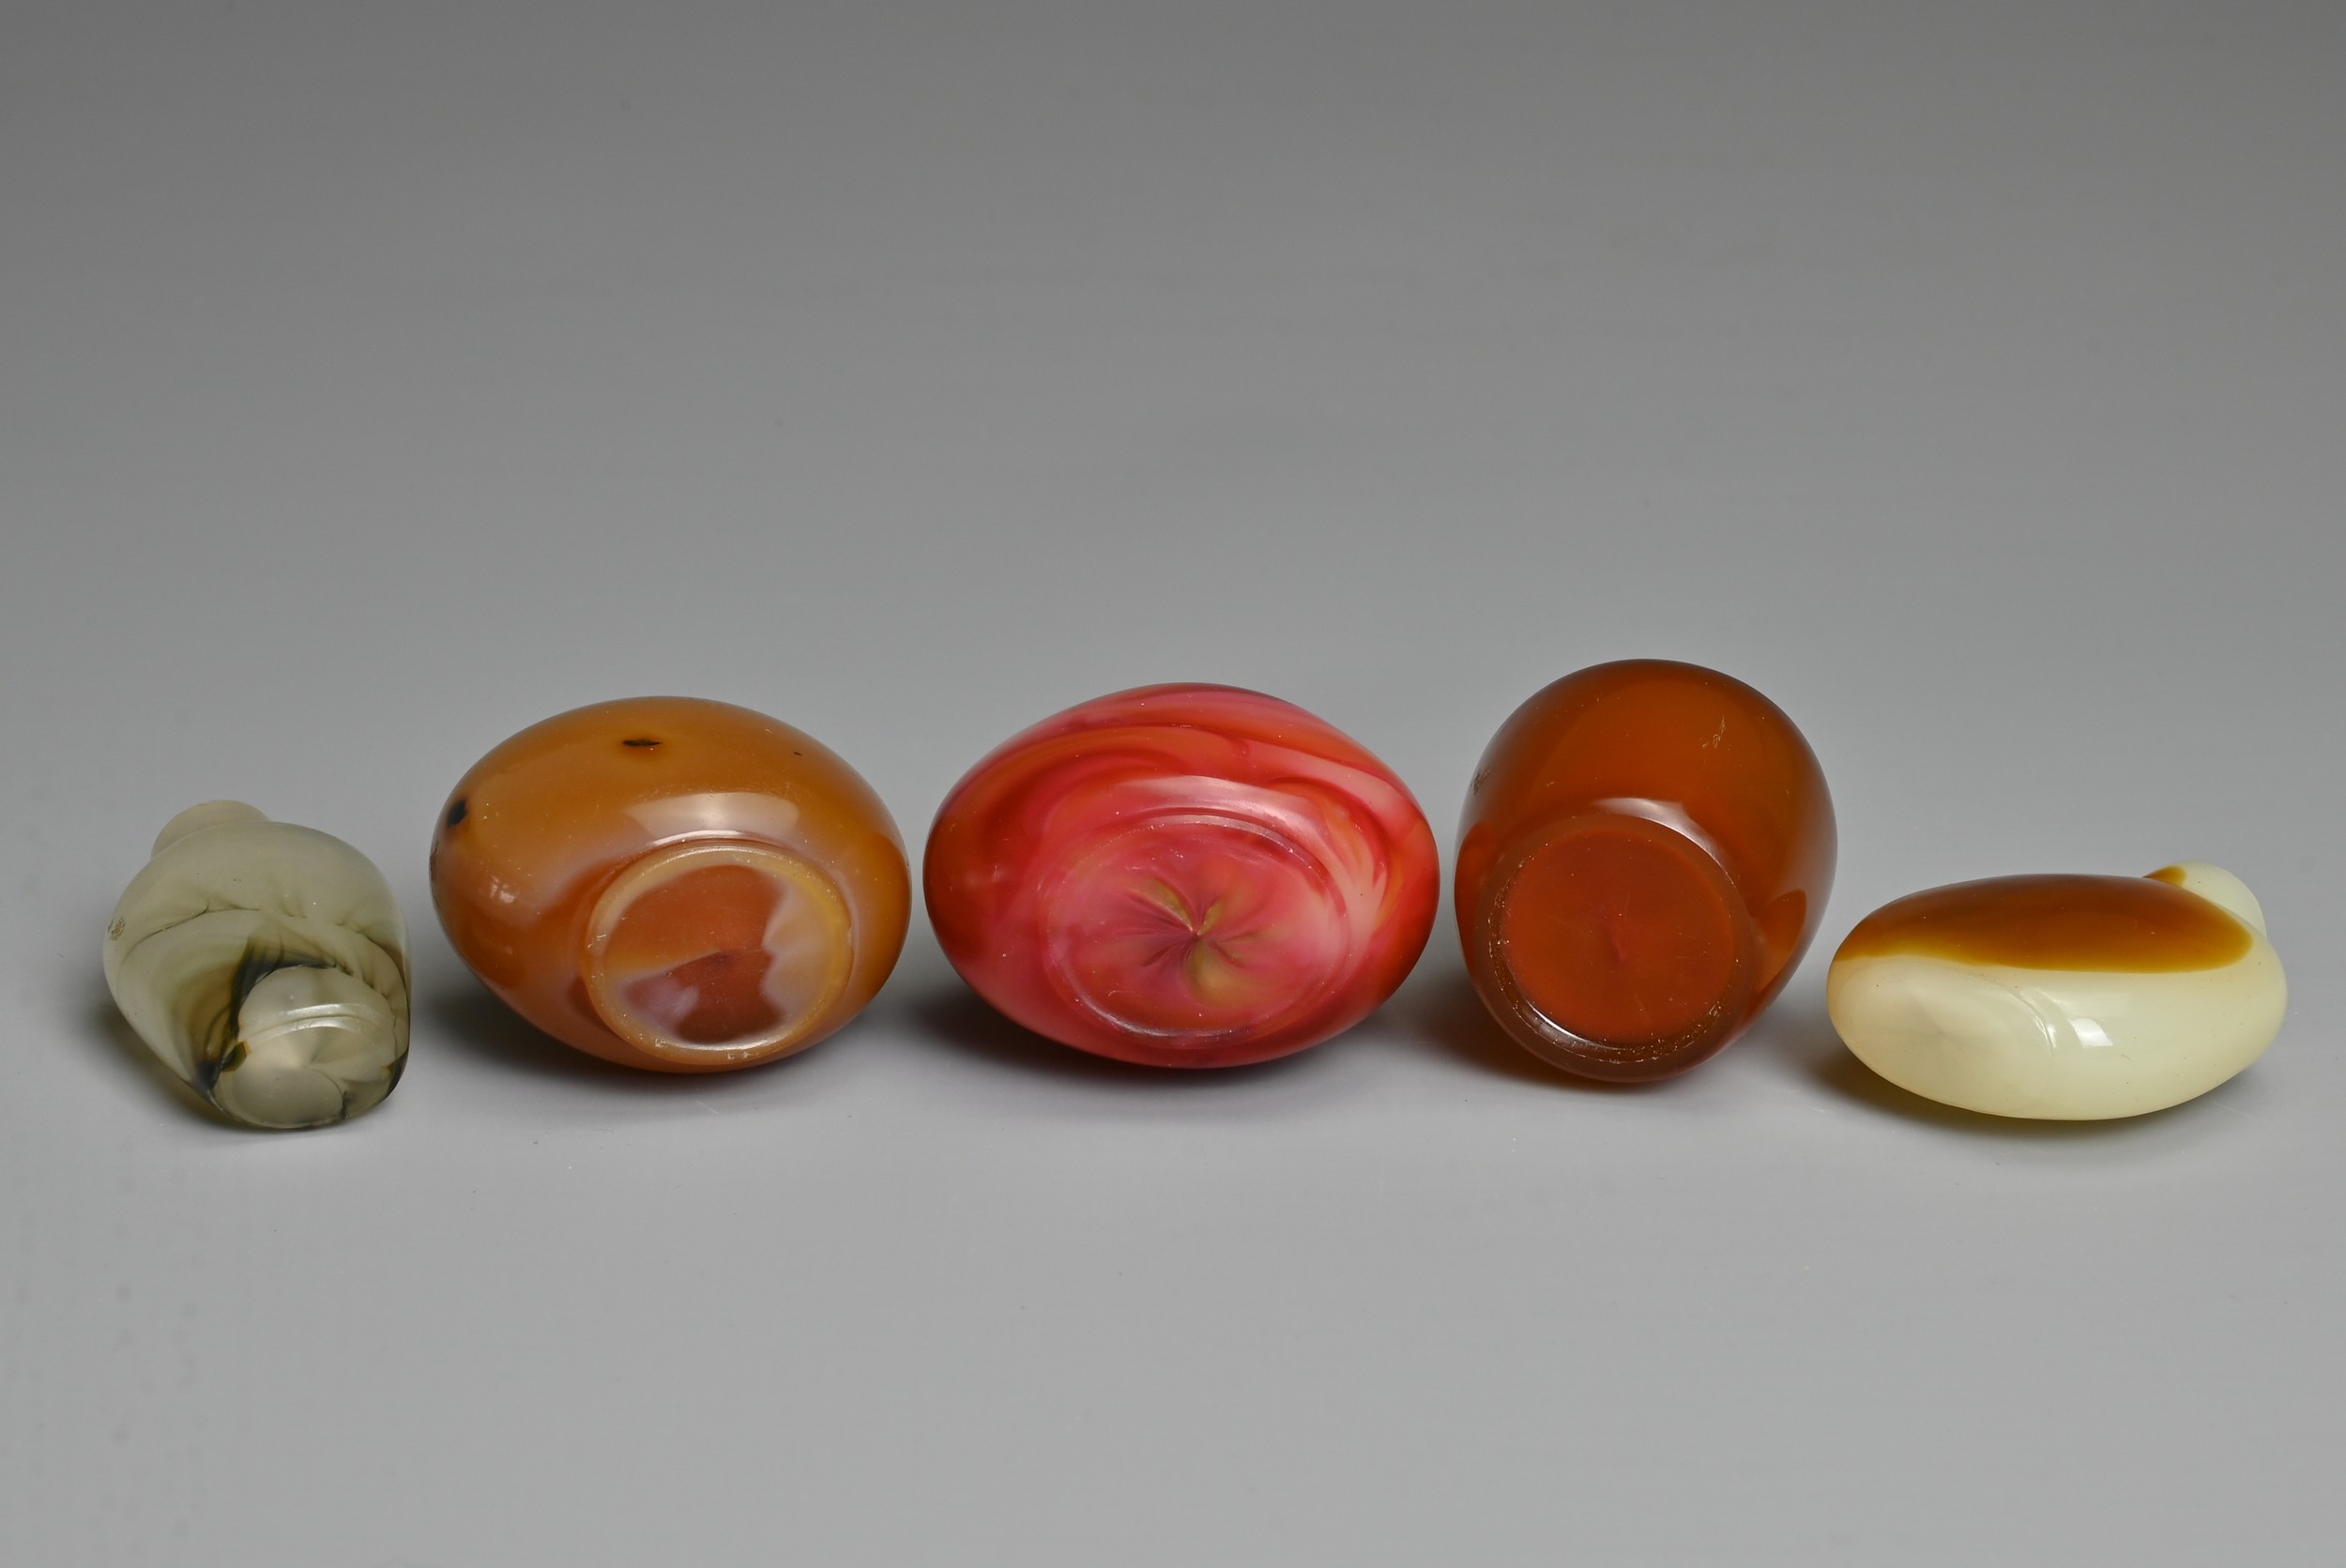 FIVE CHINESE GLASS SNUFF BOTTLES. Each of varied coloured glass of different forms. Approx. 5. - Image 5 of 5